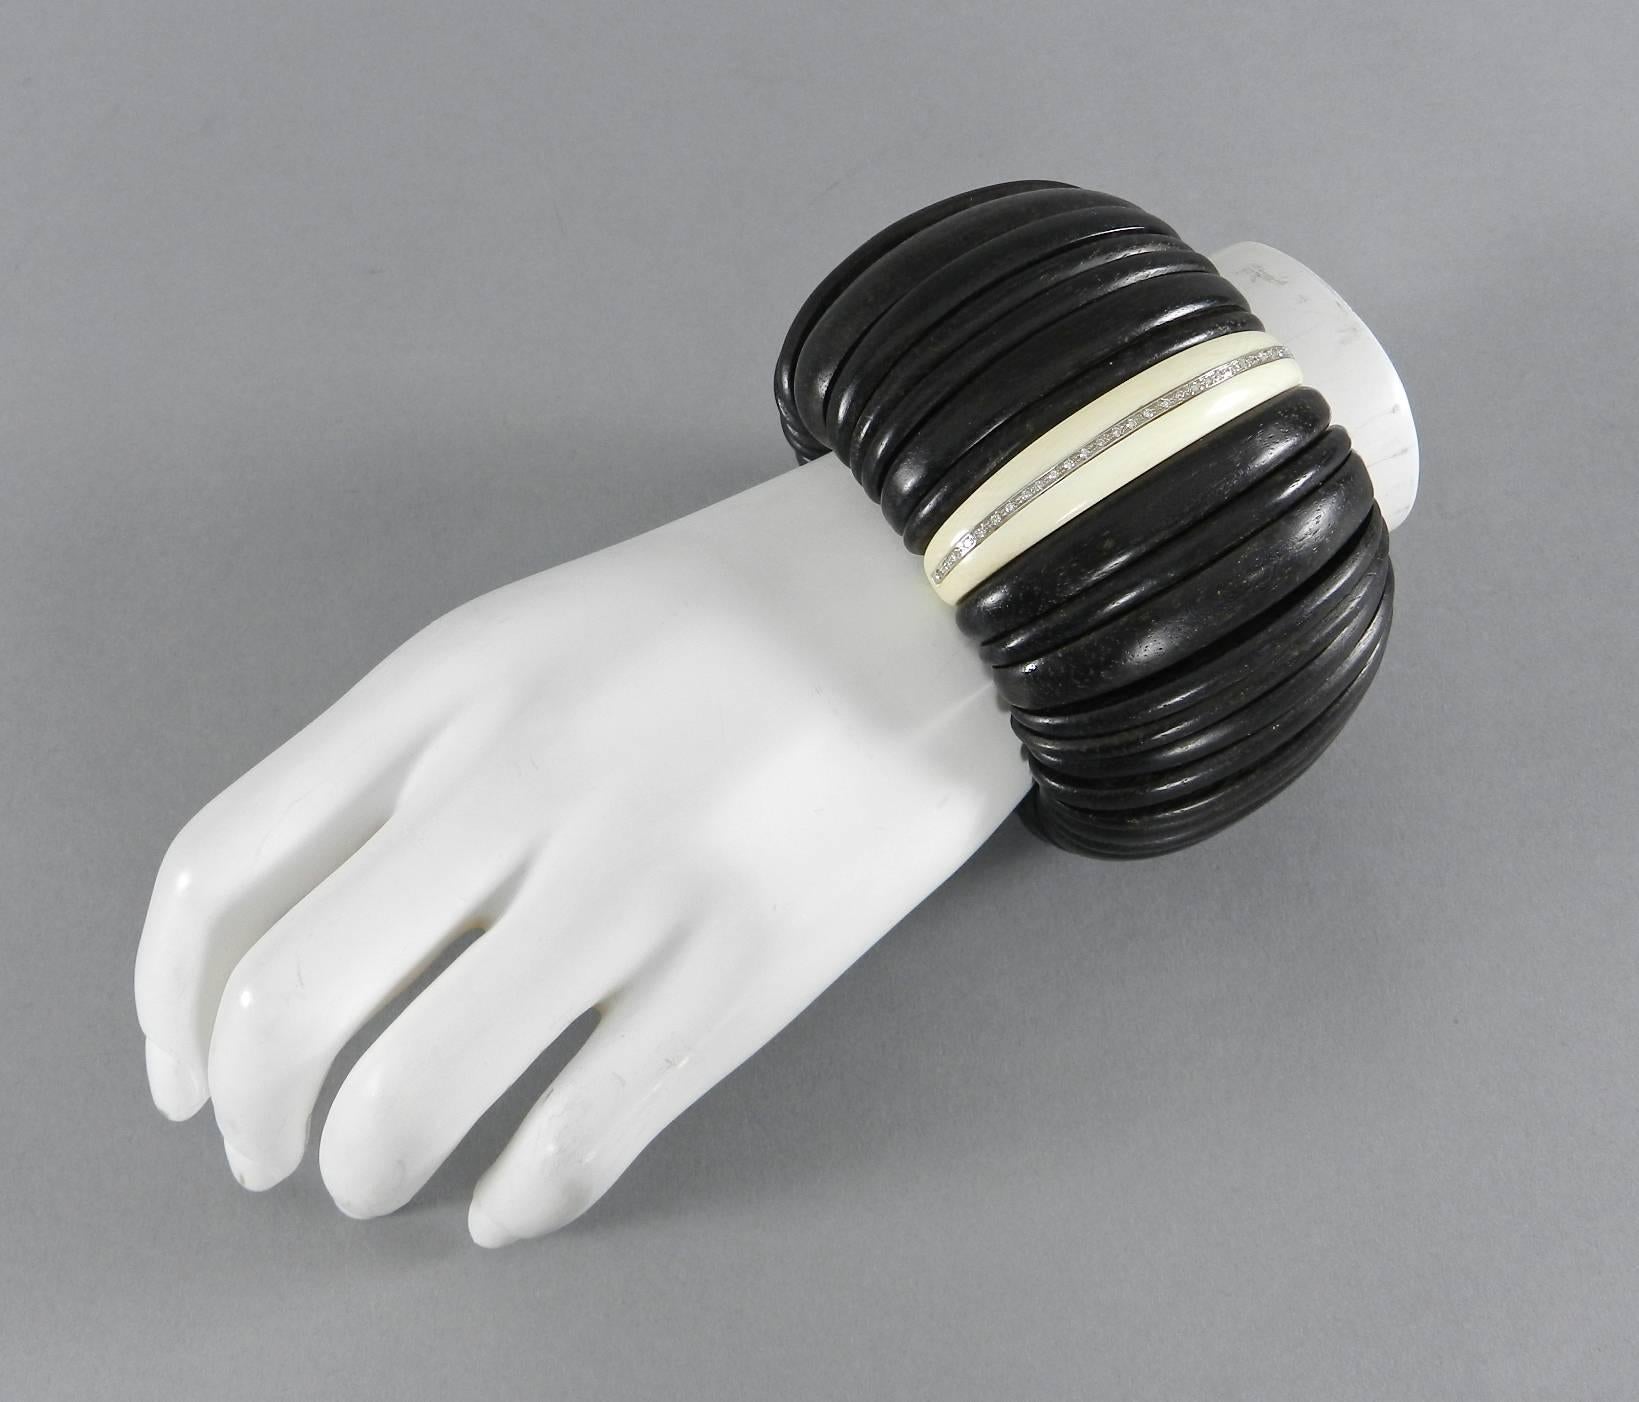 A chunky statement bracelet in ebony wood, ivory, and diamonds set in 18k white gold. Purchased at Demner Madison Avenue New York. Segmented stretch bracelet that can fit up to 7